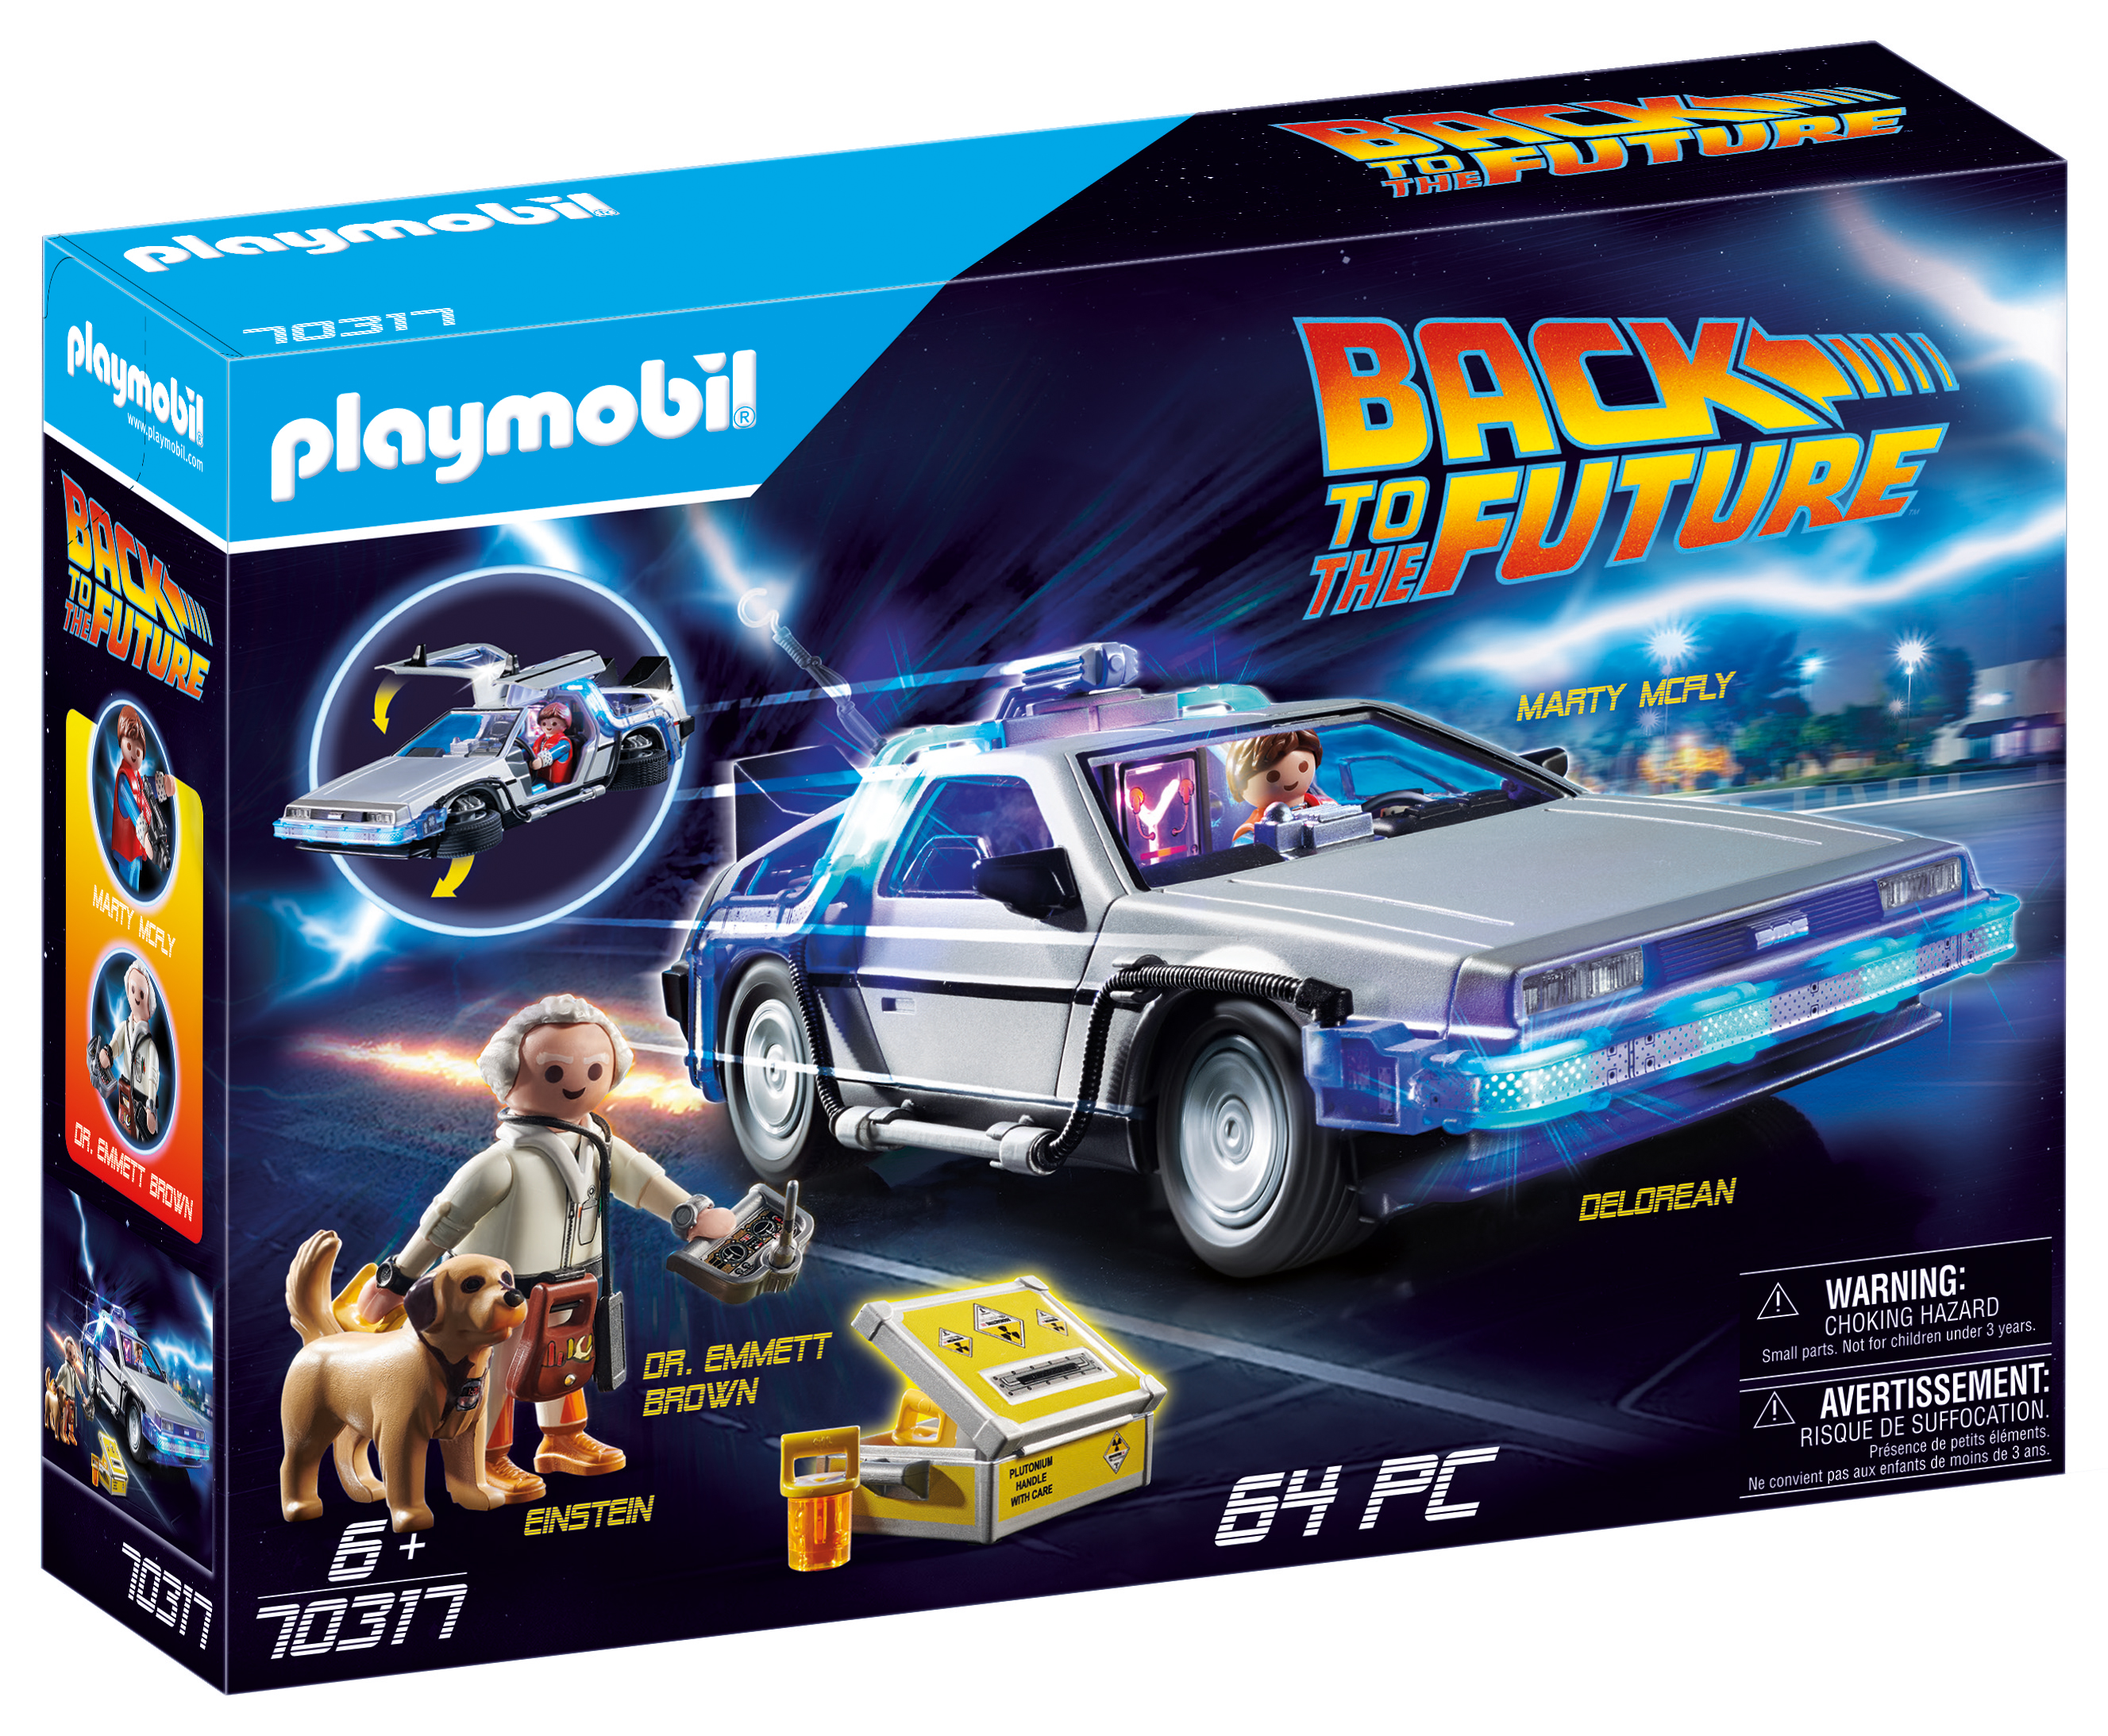 PLAYMOBIL Back to the Future DeLorean Vehicle Playset $37.82